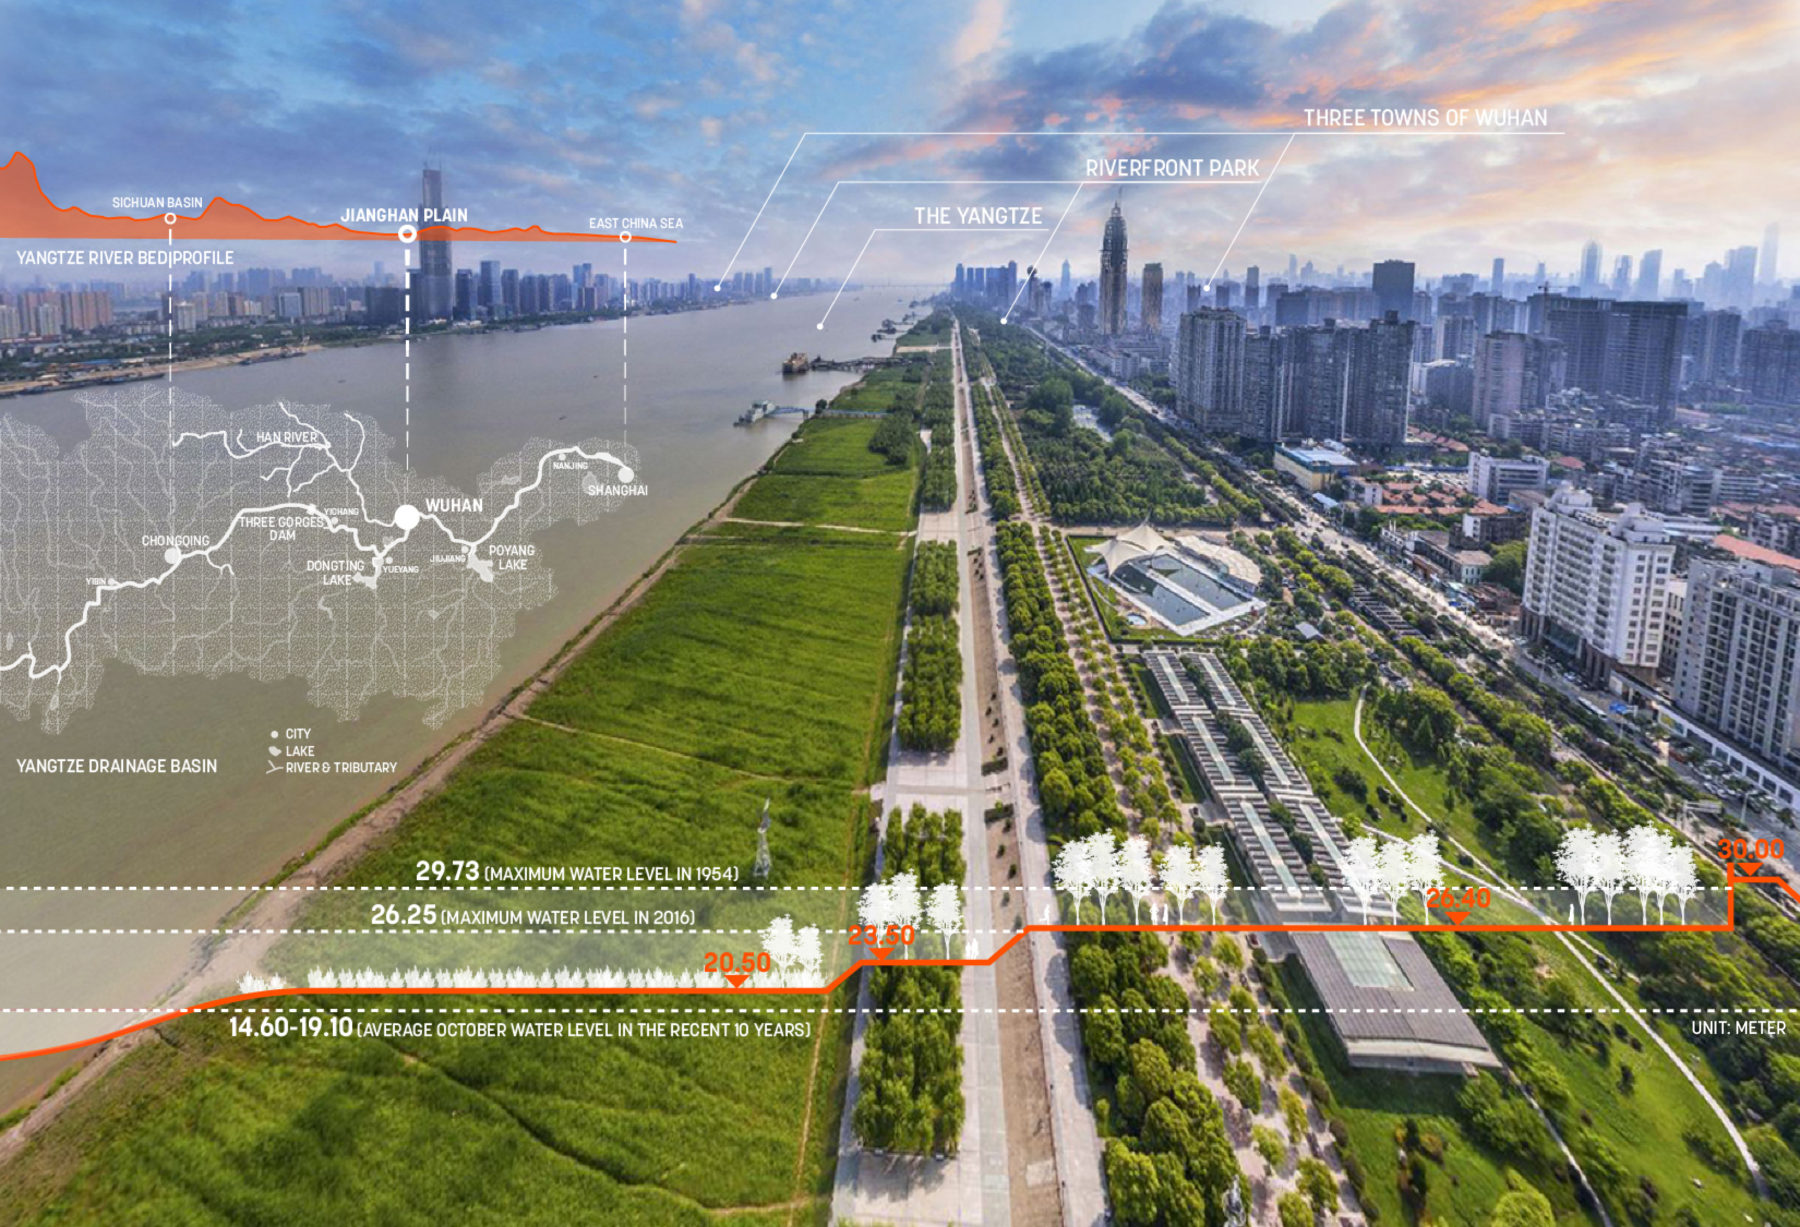 Graphic overlay on image on river running along the City of Wuhan